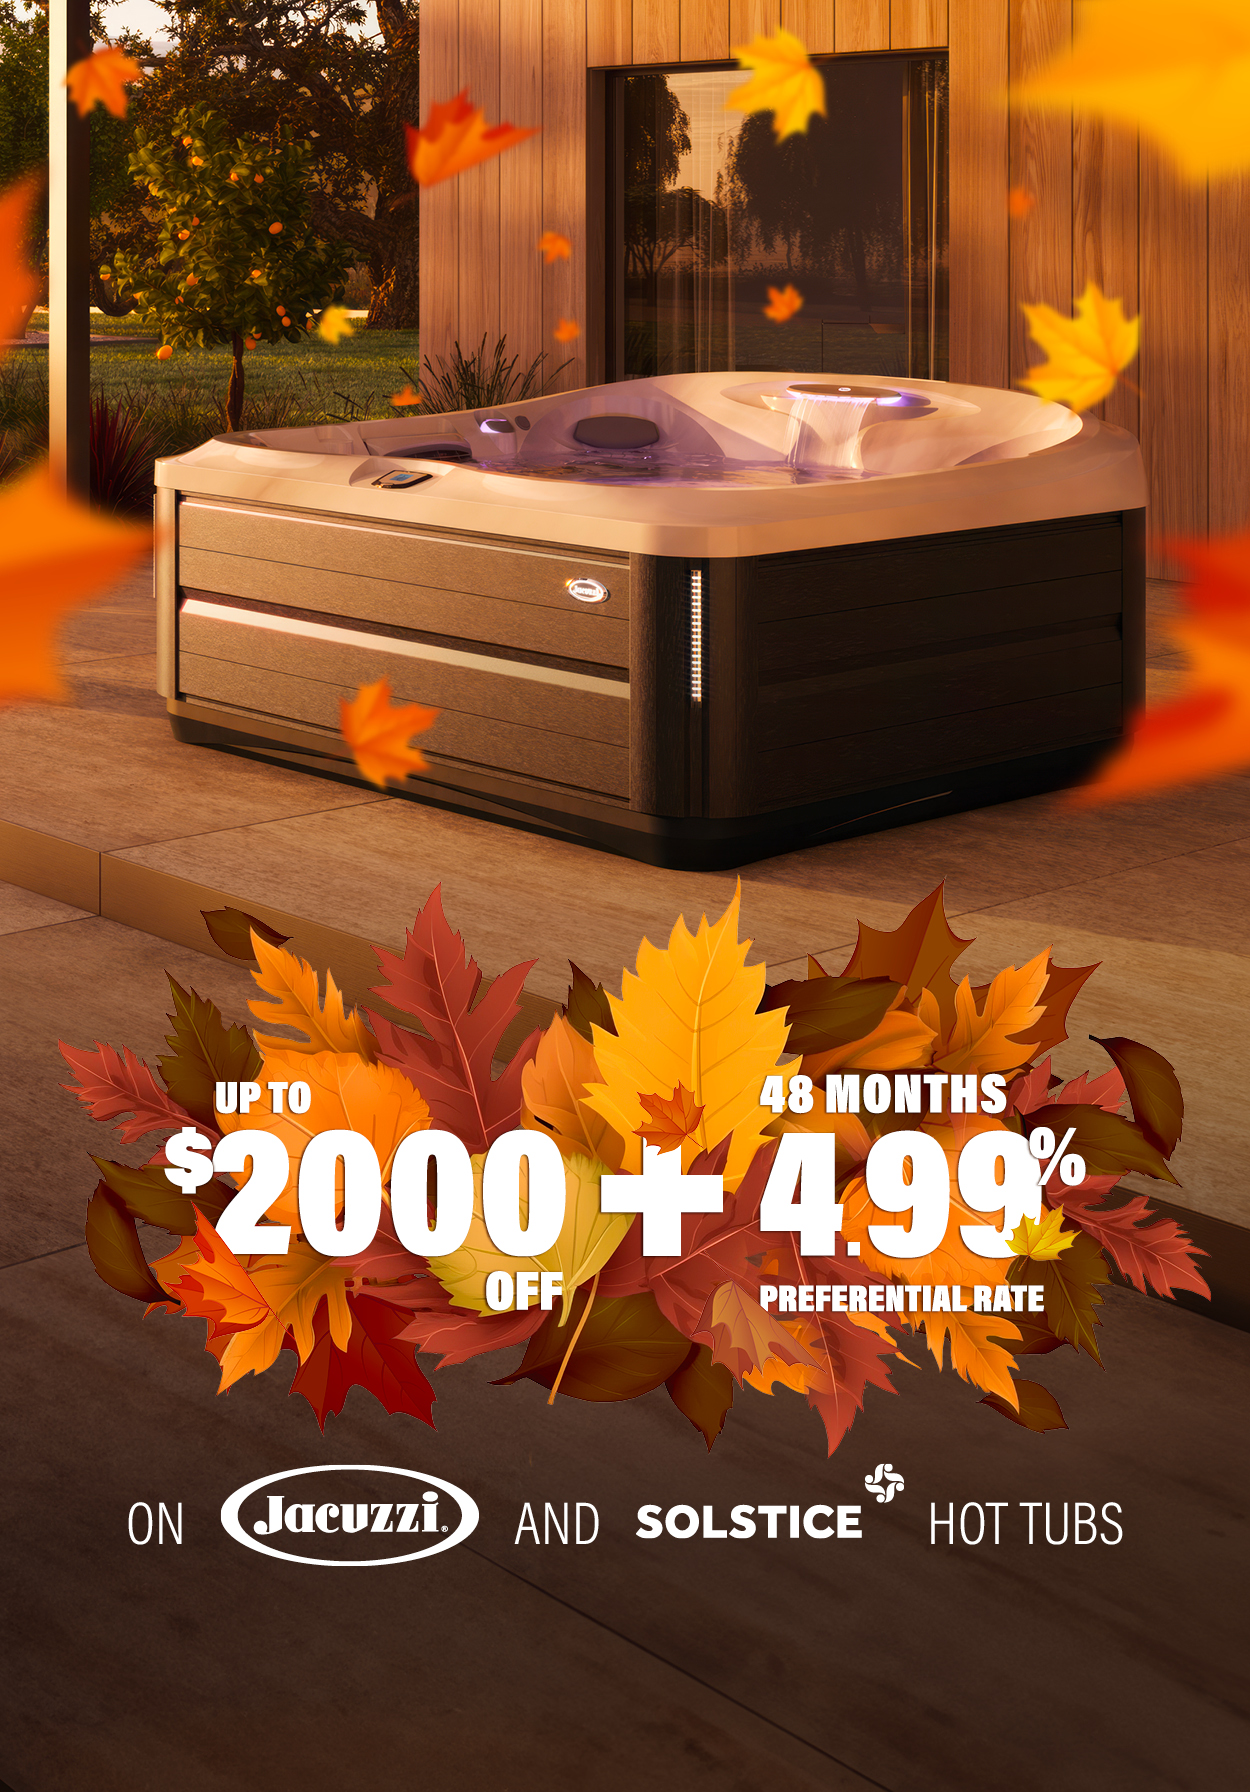 Up to $2000 on Jacuzzi and Solstice